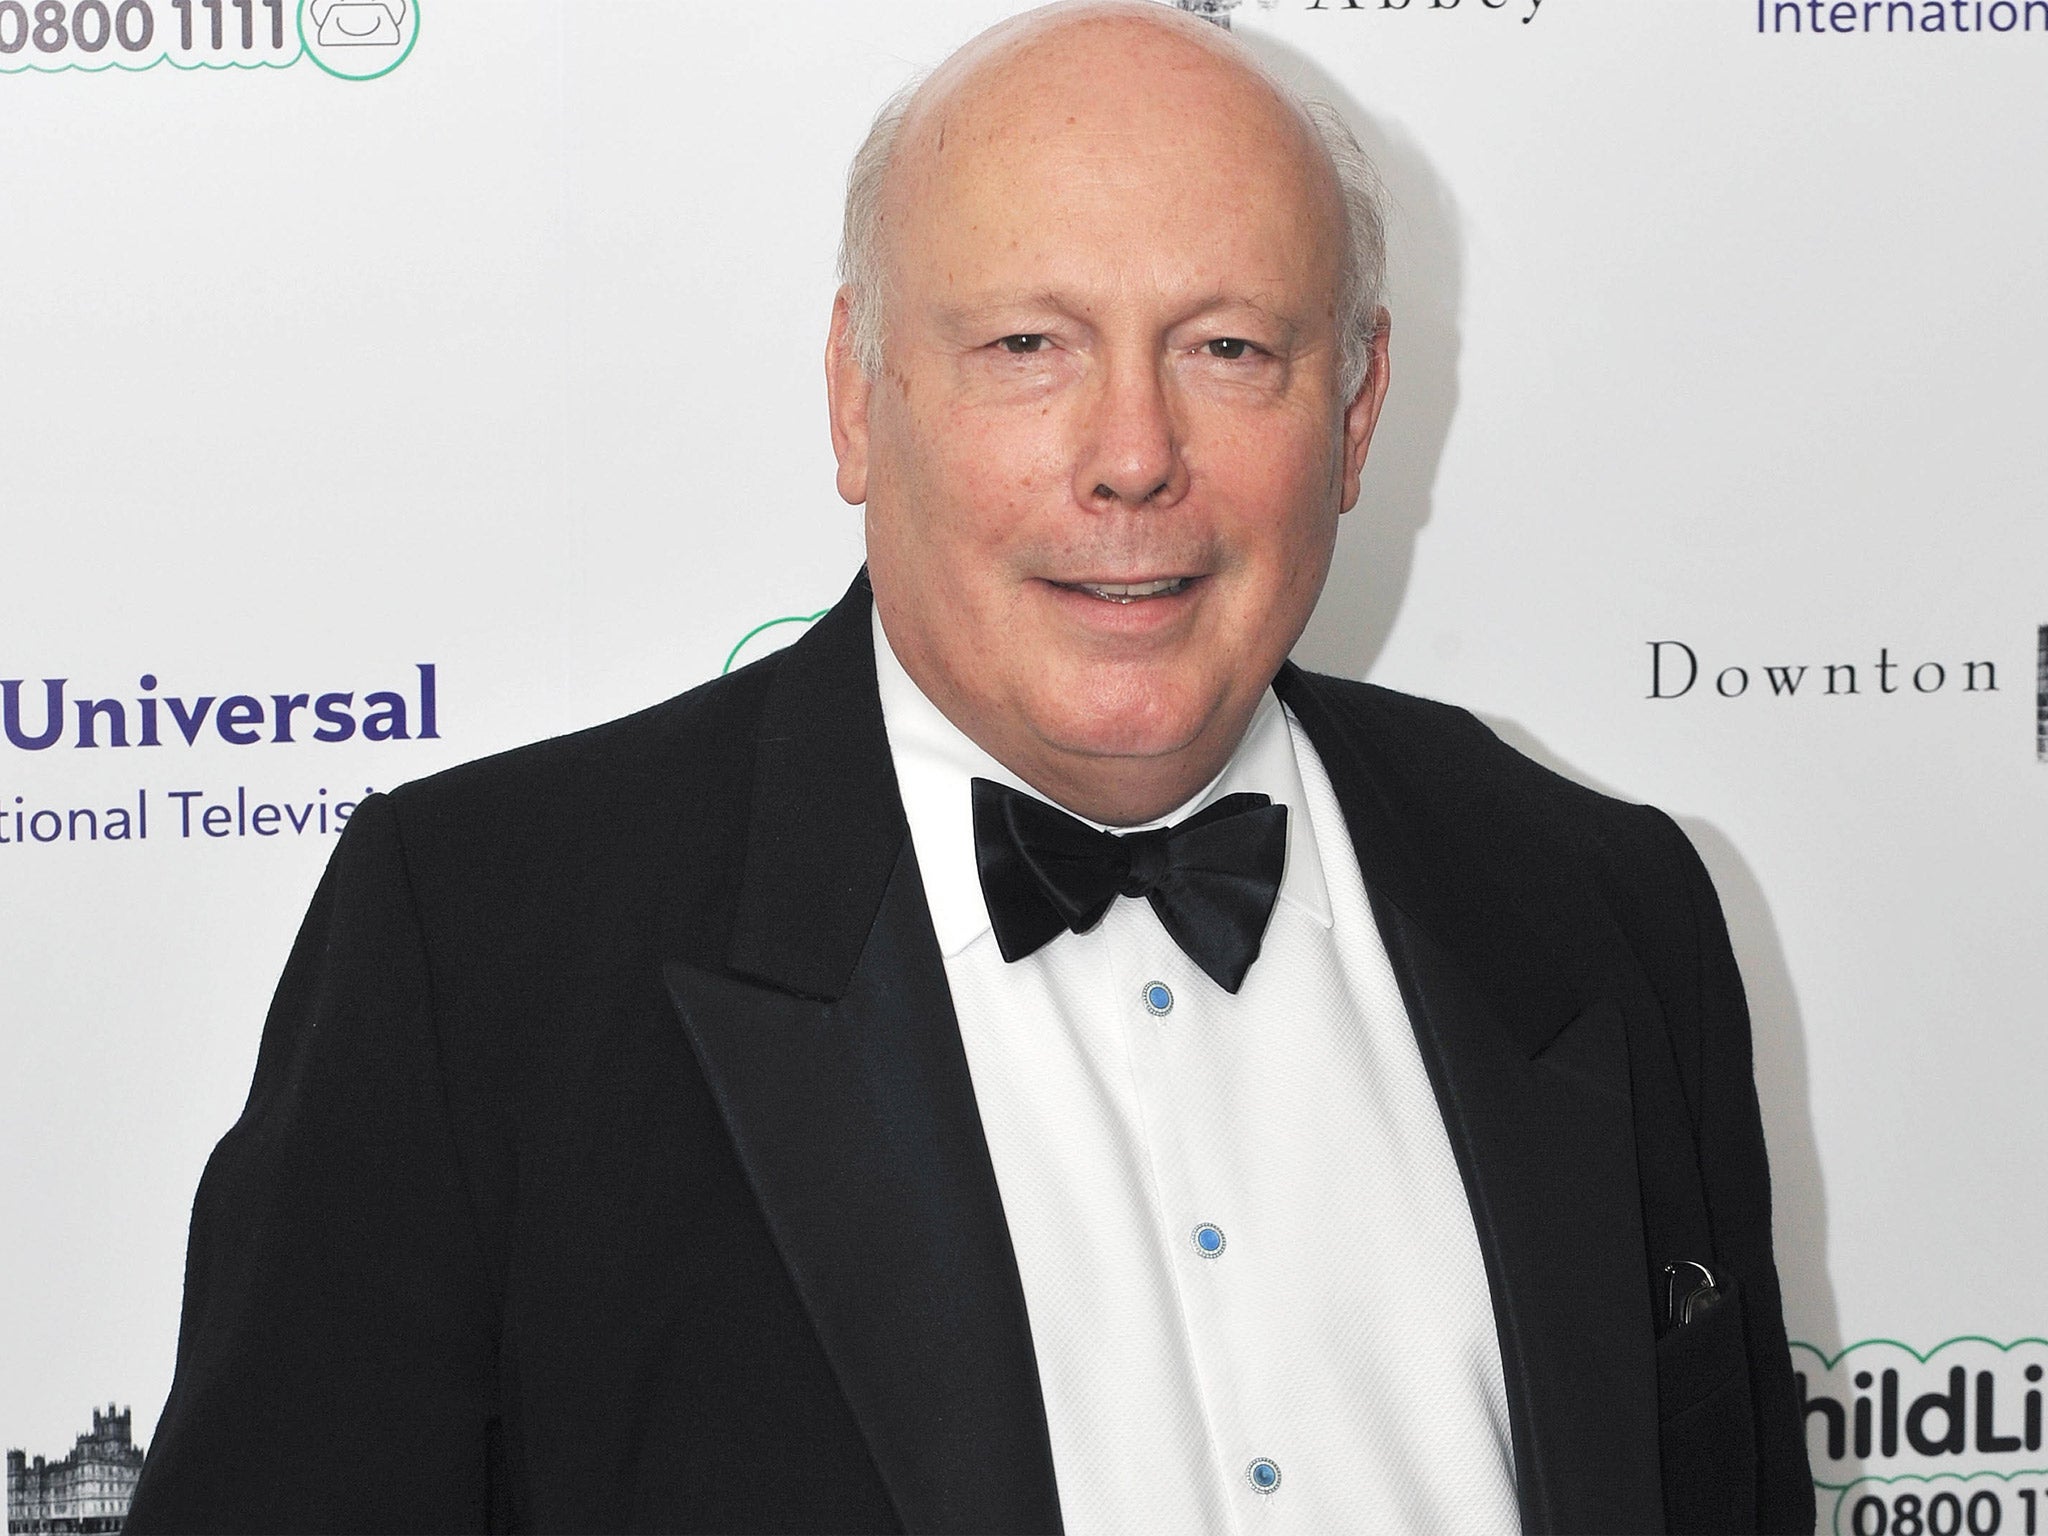 Julian Fellowes may have been hacked using details stolen from journalist Tina Brown